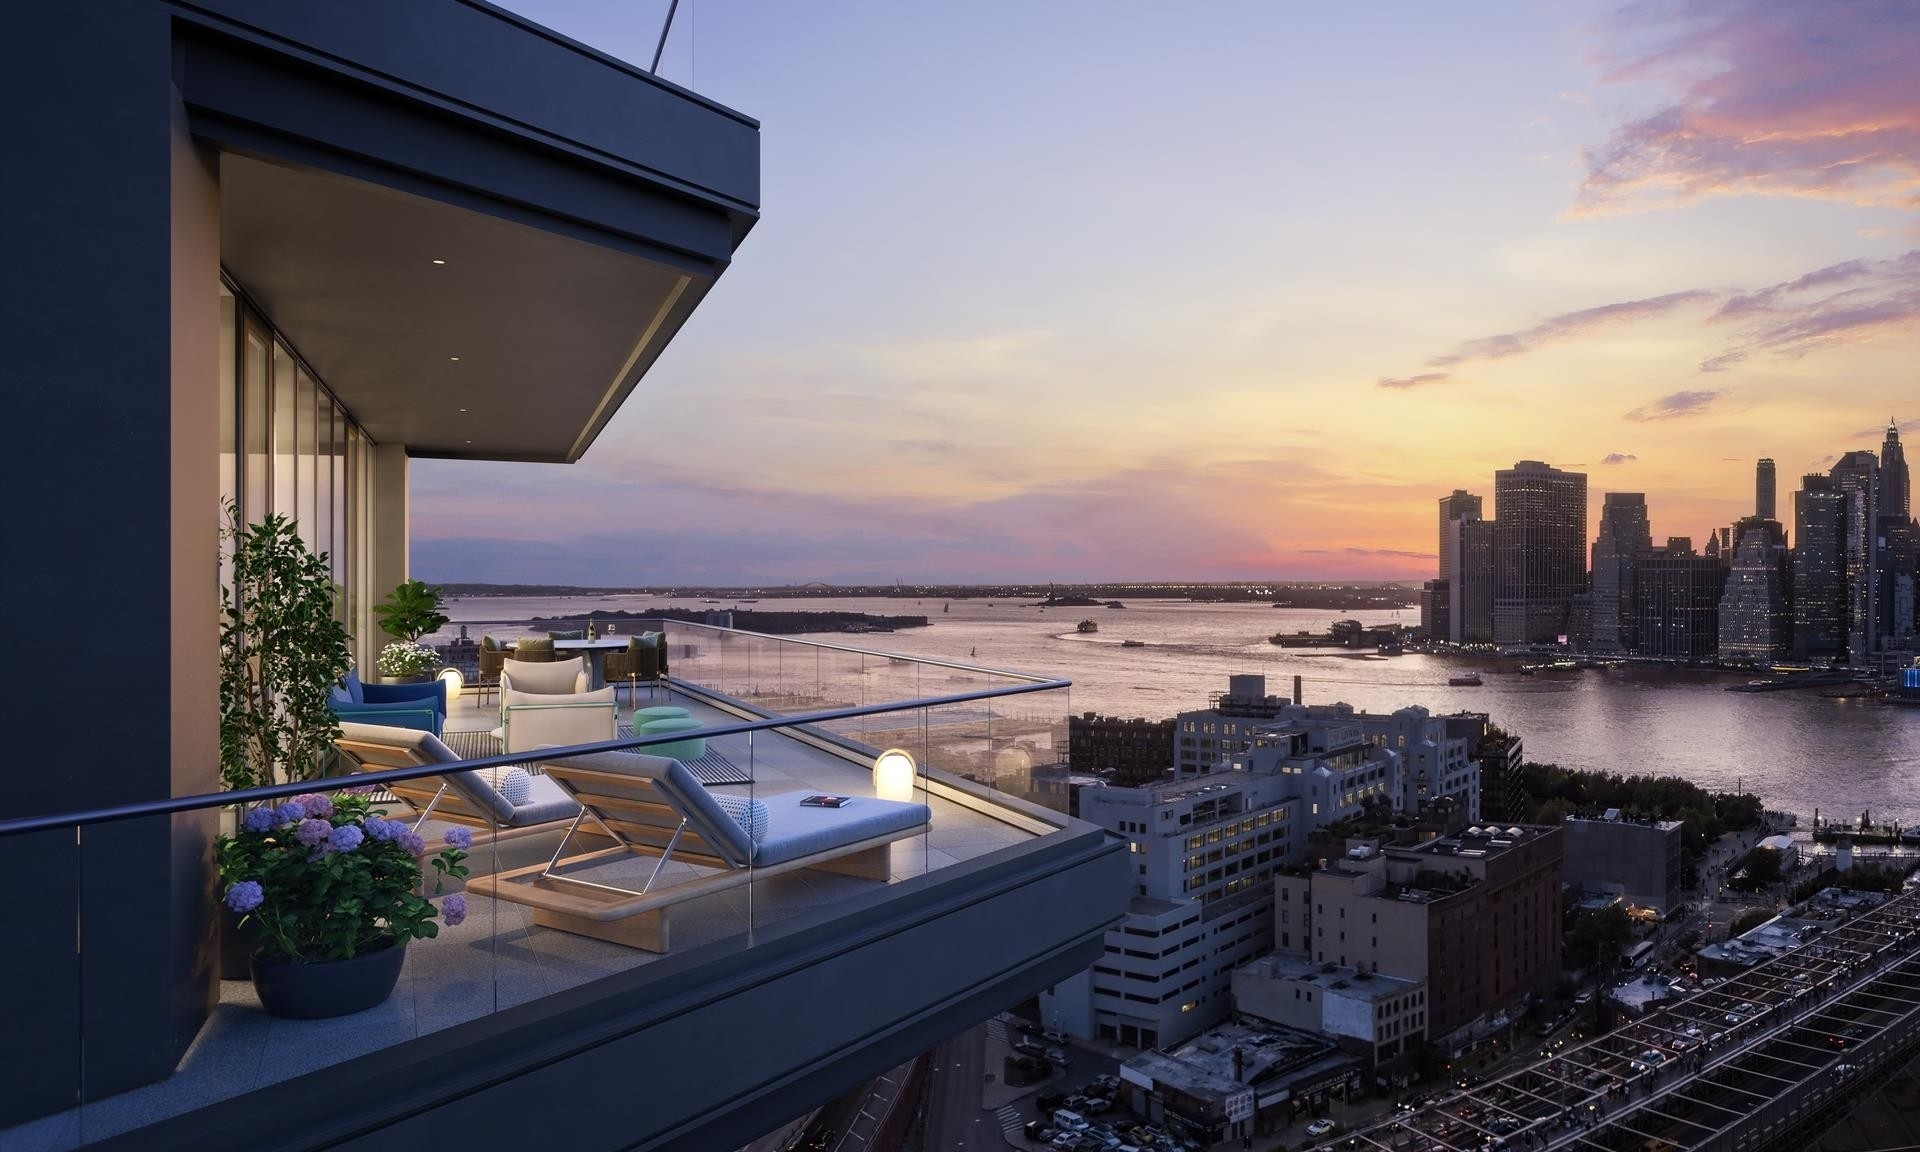 Condominium for Sale at Olympia Dumbo, 30 FRONT ST, 25A Brooklyn, New York 11201